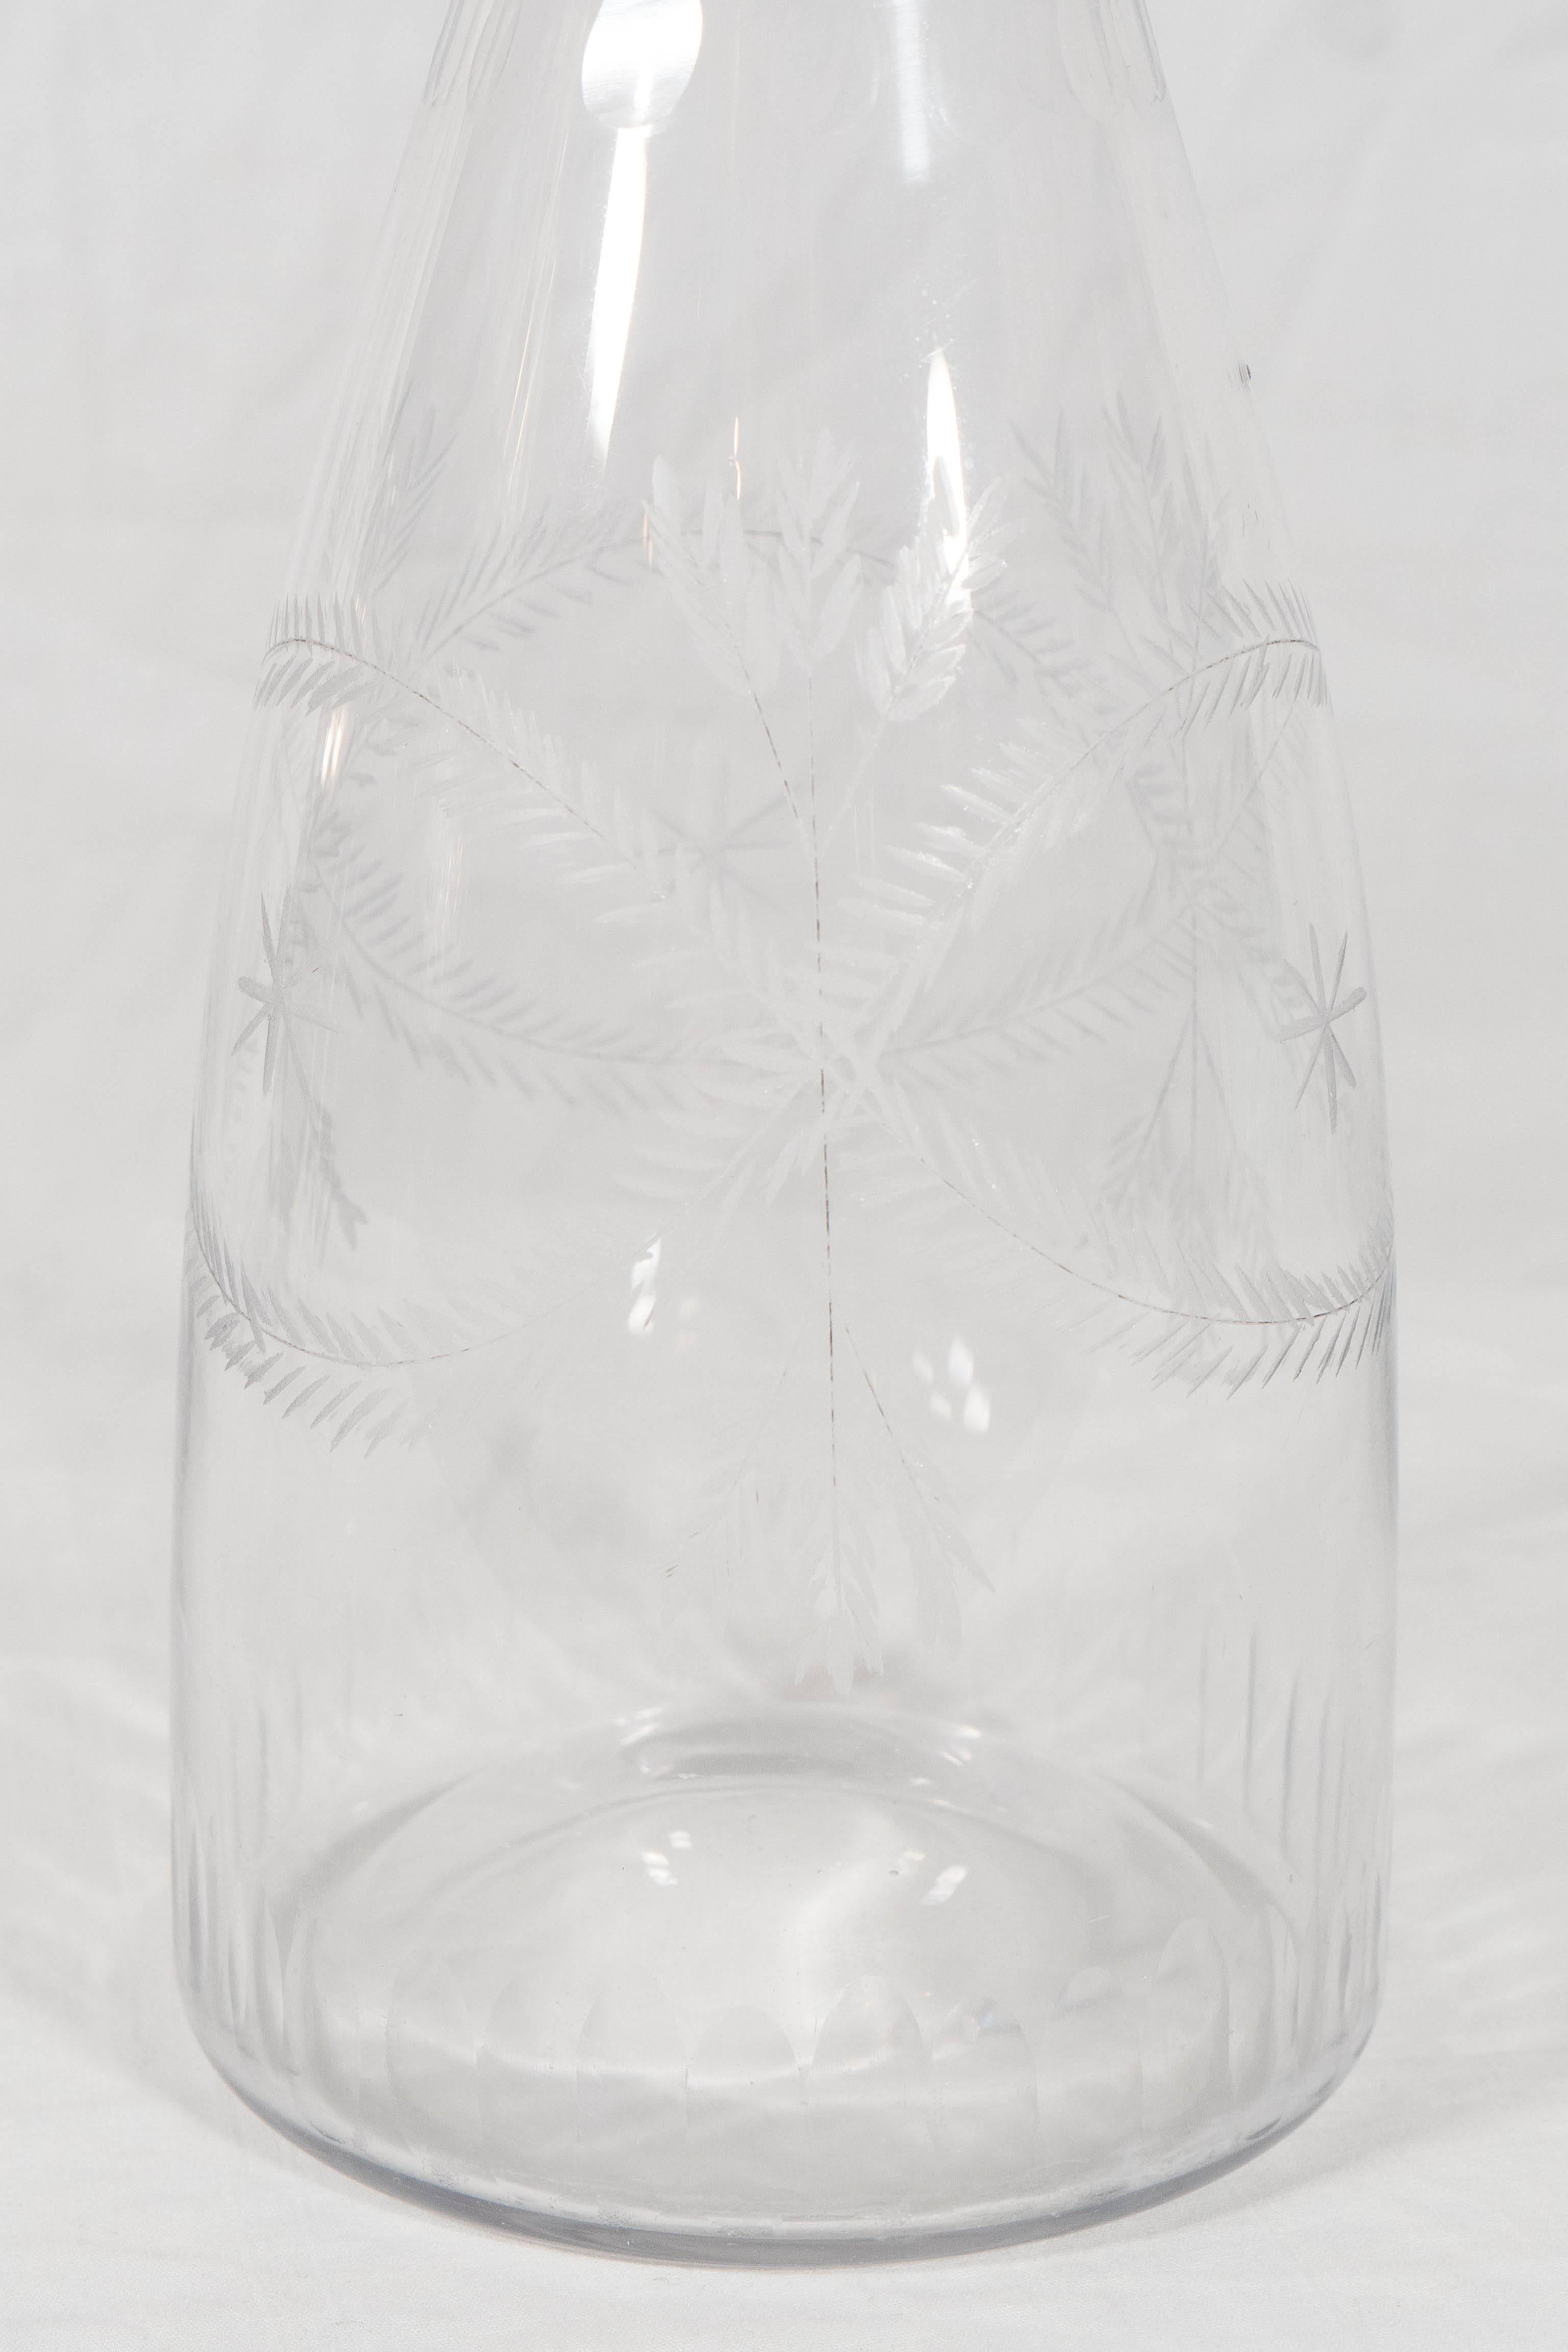 An English 18th century whisky decanter engraved with stars and wheat sheaves (whisky is made of fermented wheat). The base and the neck with flat cut ovals all around. The style of engraving and the flat cut stopper date the bottle to the last